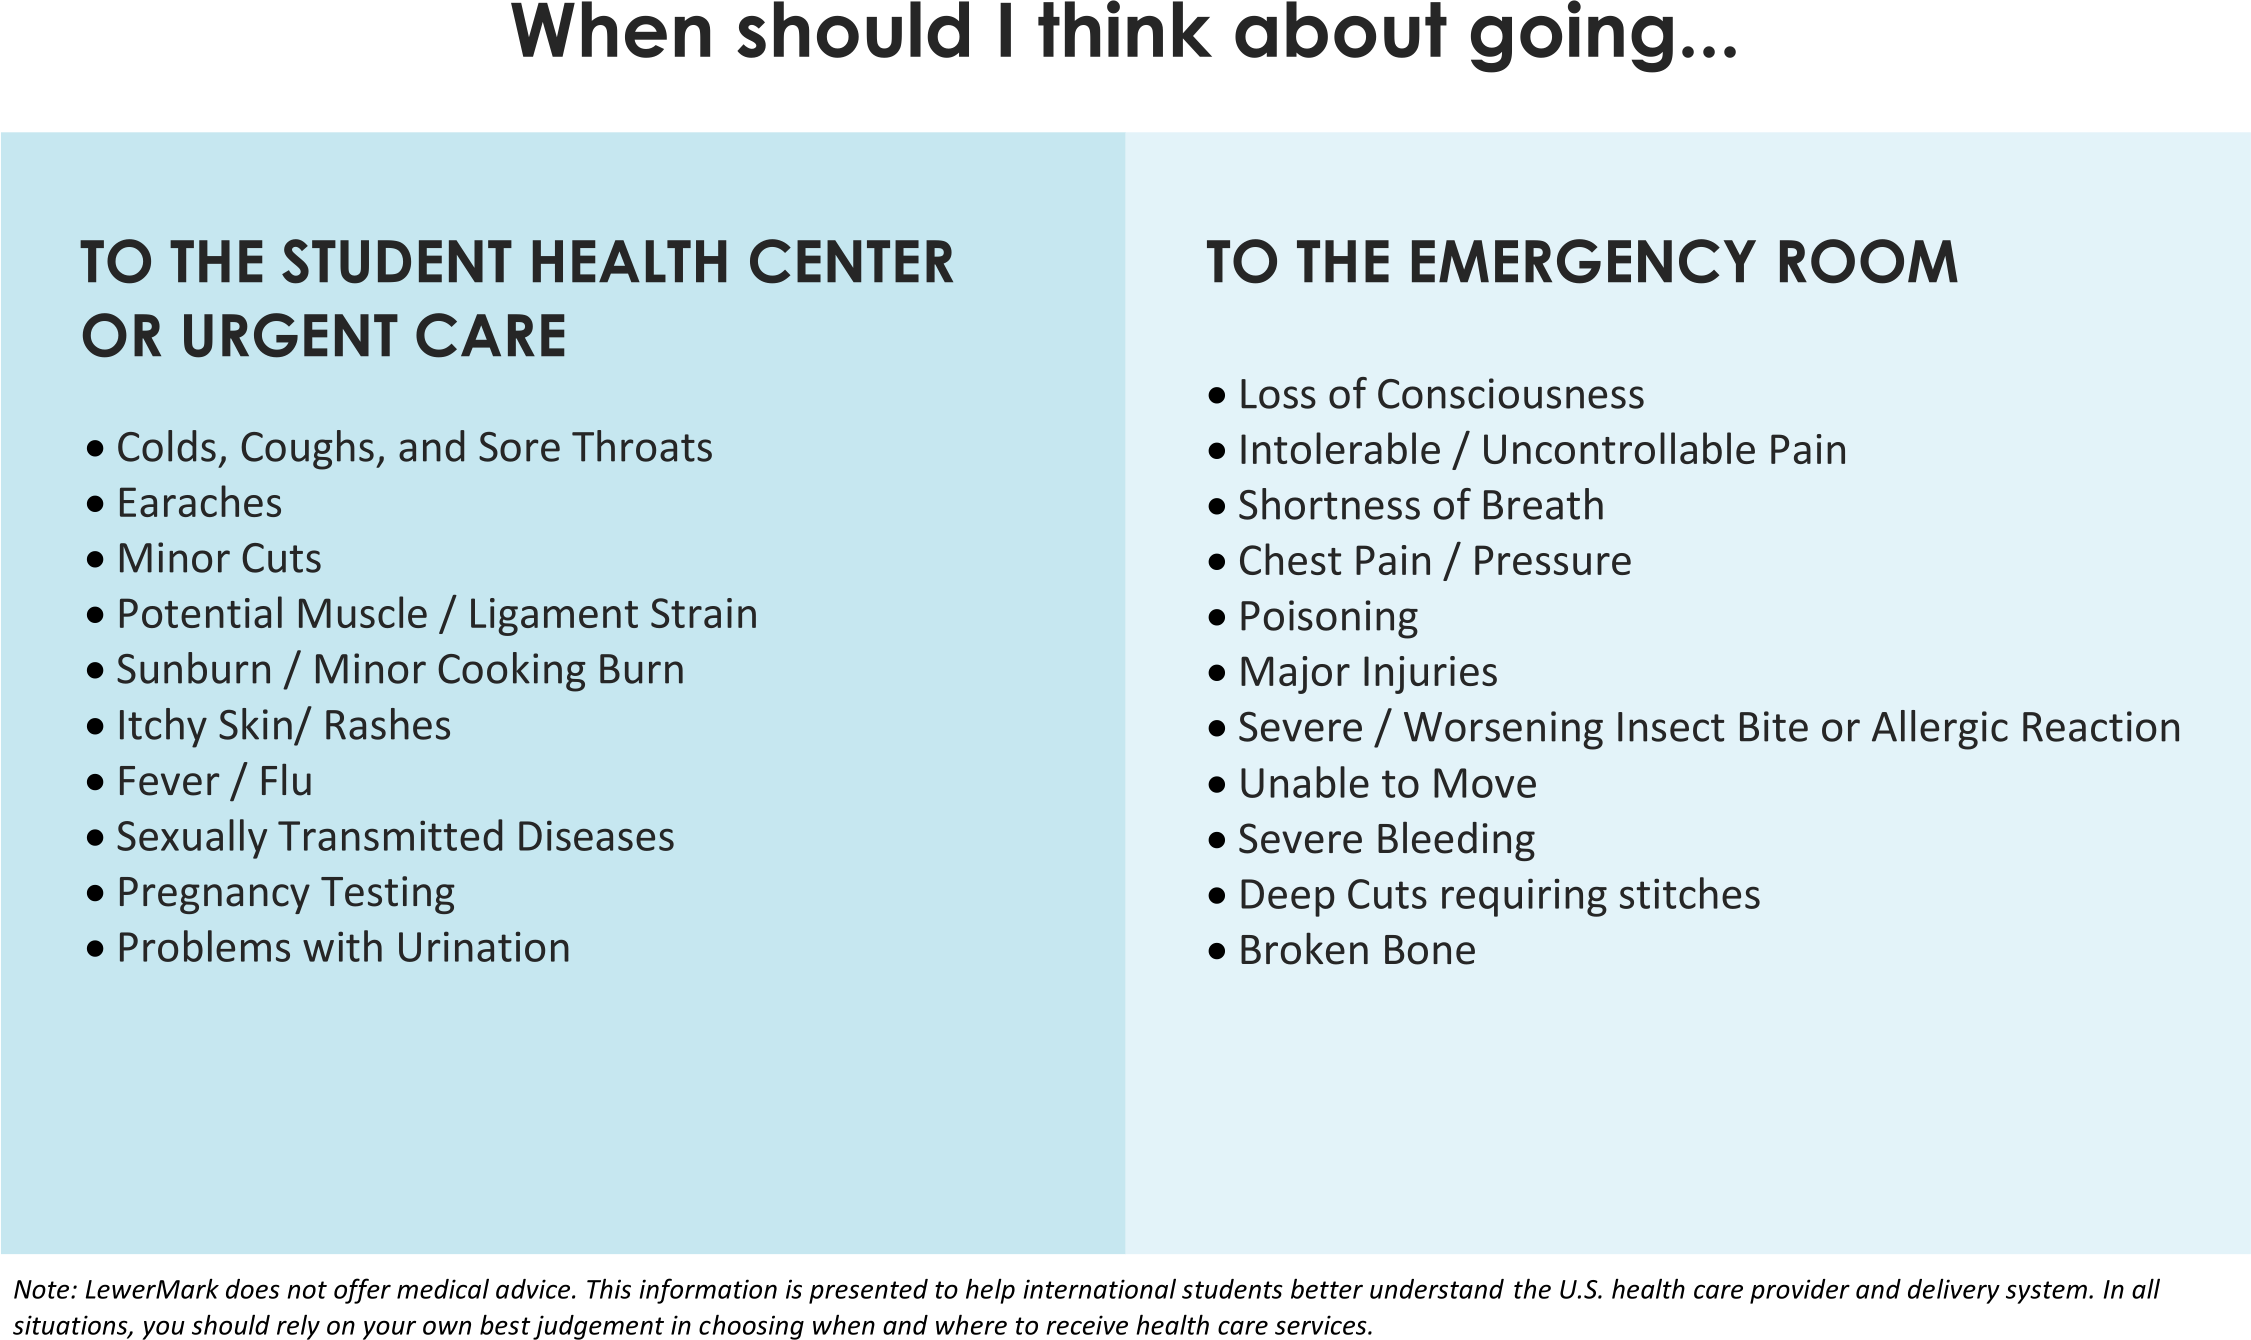 When should I go to Student Health vs. the ER?